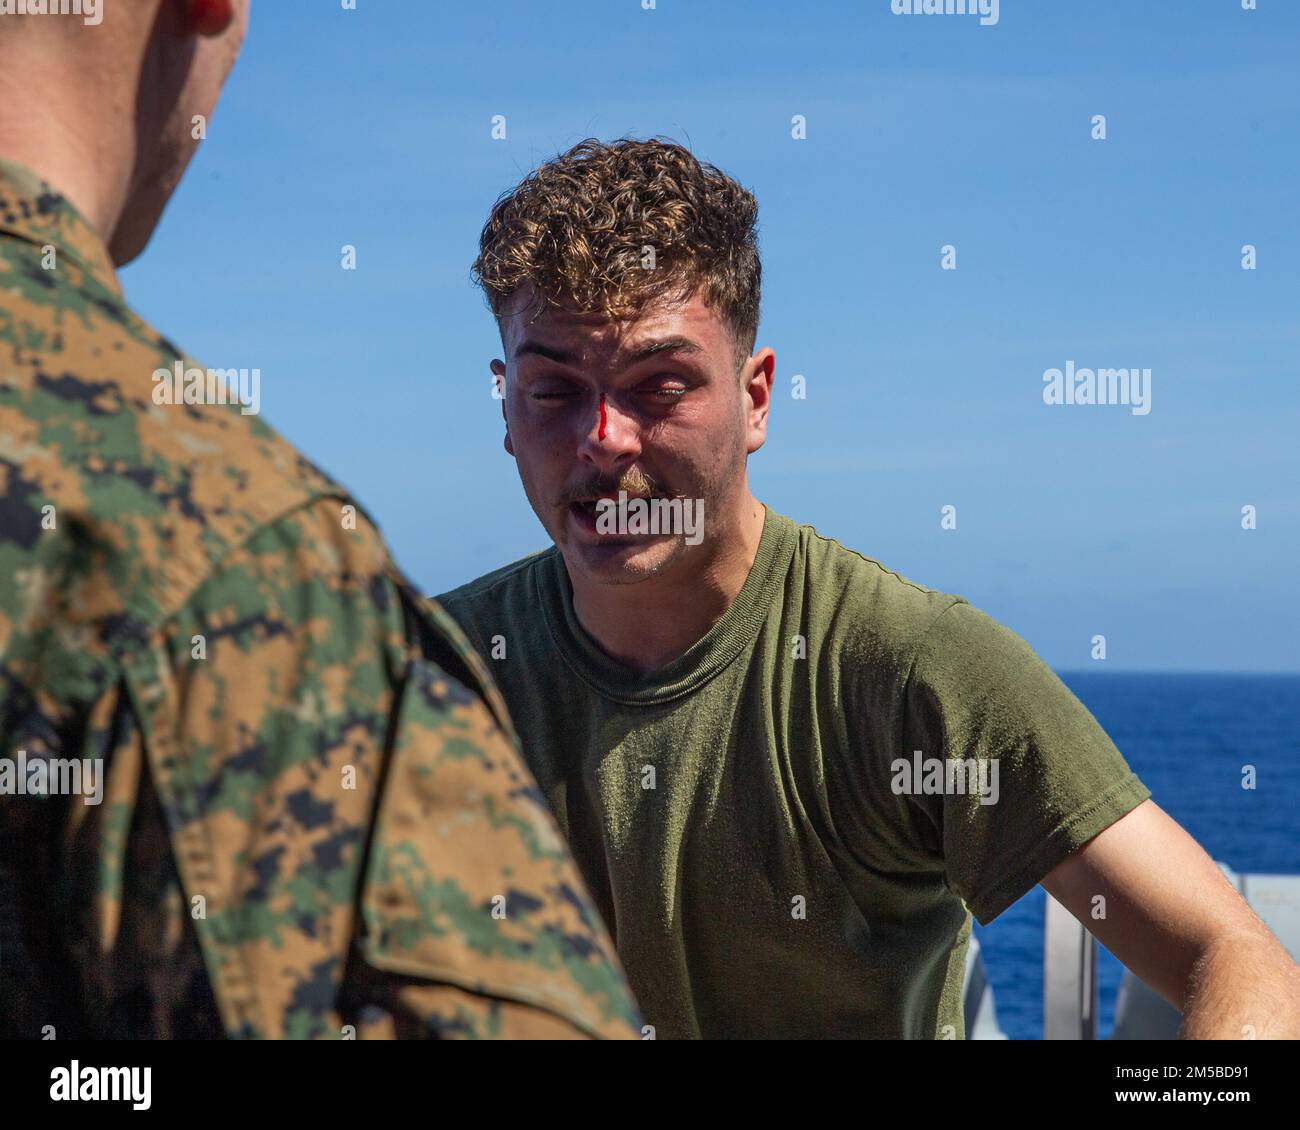 U.S. Marine Corps Lance Cpl. Mason Hamline, a radio operator with Battalion Landing Team (BLT) 1/5, 31st Marine Expeditionary Unit, catches his breath during an OC spray course, aboard USS Green Bay, Philippine Sea, Feb. 19, 2022. The 31st MEU is operating aboard the ships of the America Amphibious Strike Group in the 7th fleet area of operations to enhance interoperability with allies and partners and serve as a ready response to defend peace and stability in the Indo–Pacific Region. Stock Photo